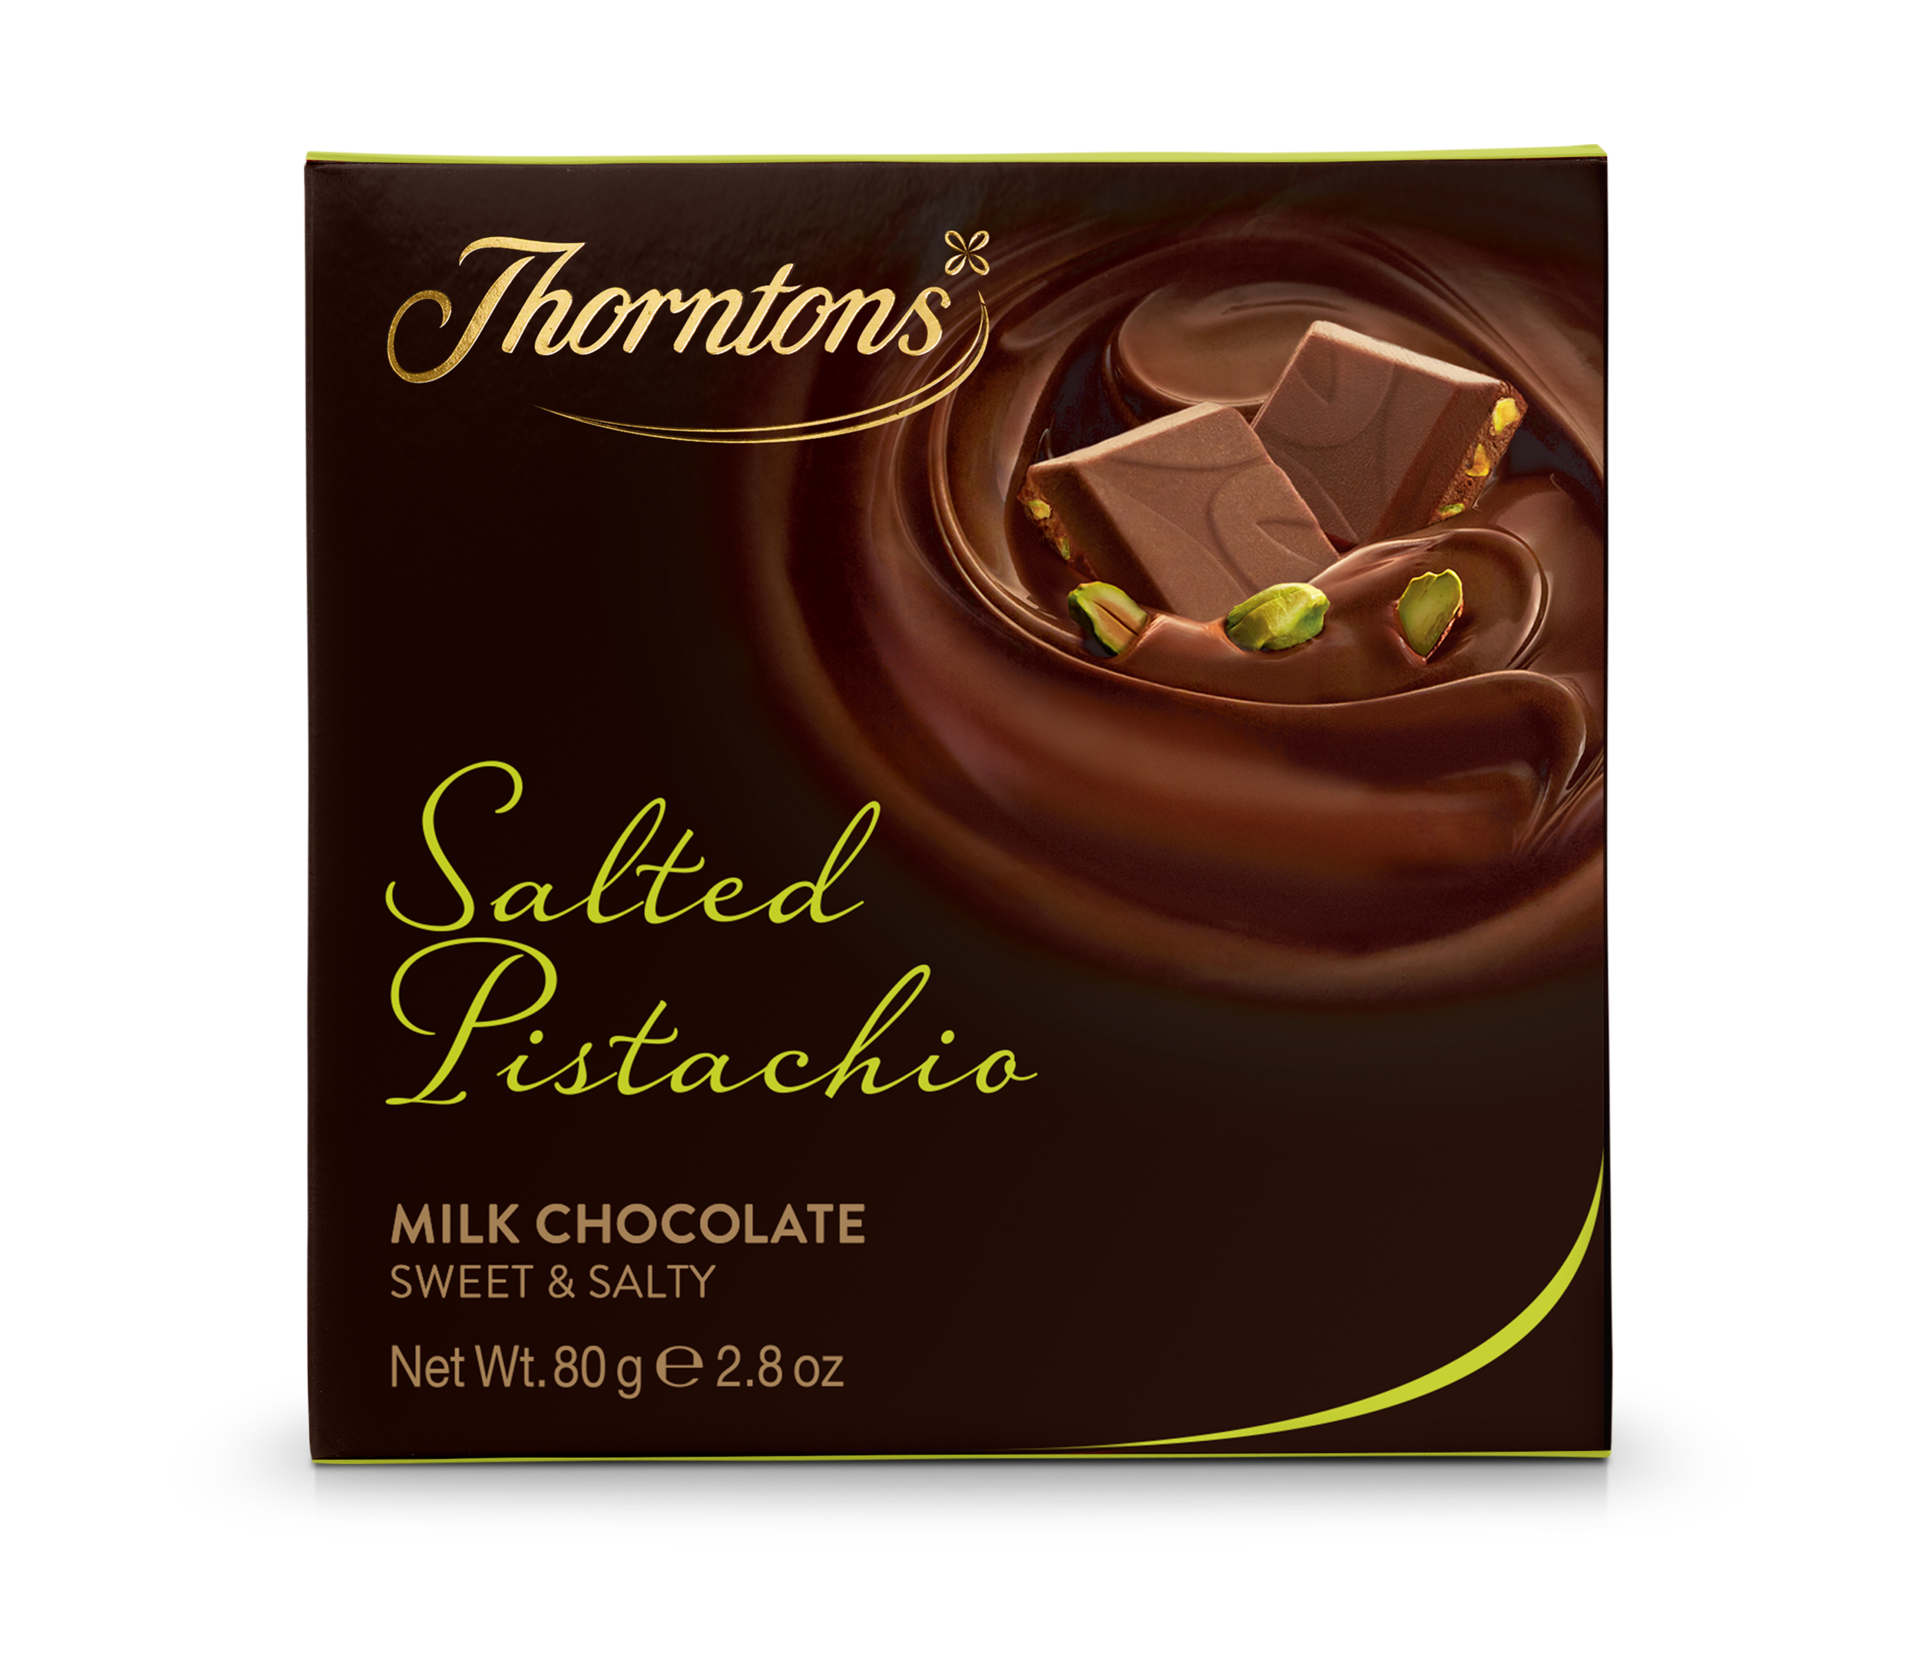 https://www.thorntons.com/medias/sys_master/images/hc6/hd3/8916763574302/77176936_main/77176936-main.png?resize=ProductGridComponent